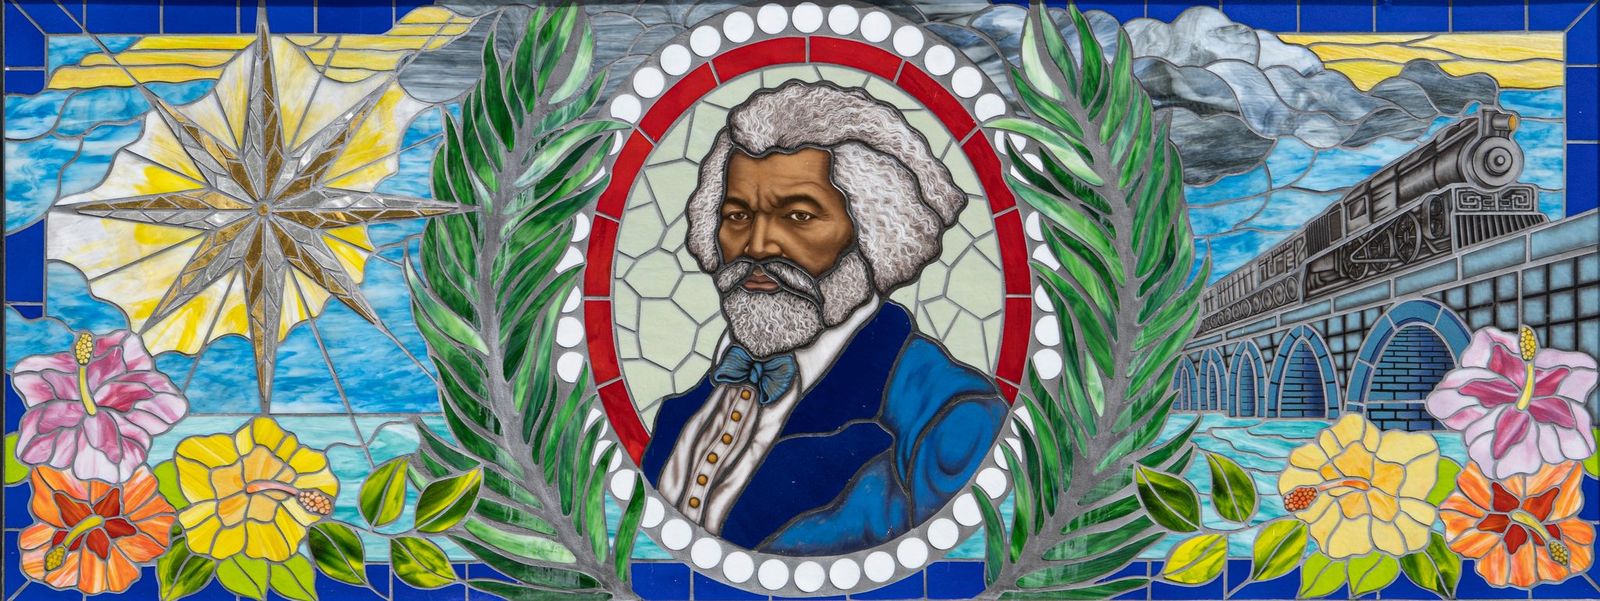 Public art mosaic of Frederick Douglass with blue glass, colorful flowers, and a train on a bridge in a traditional style.